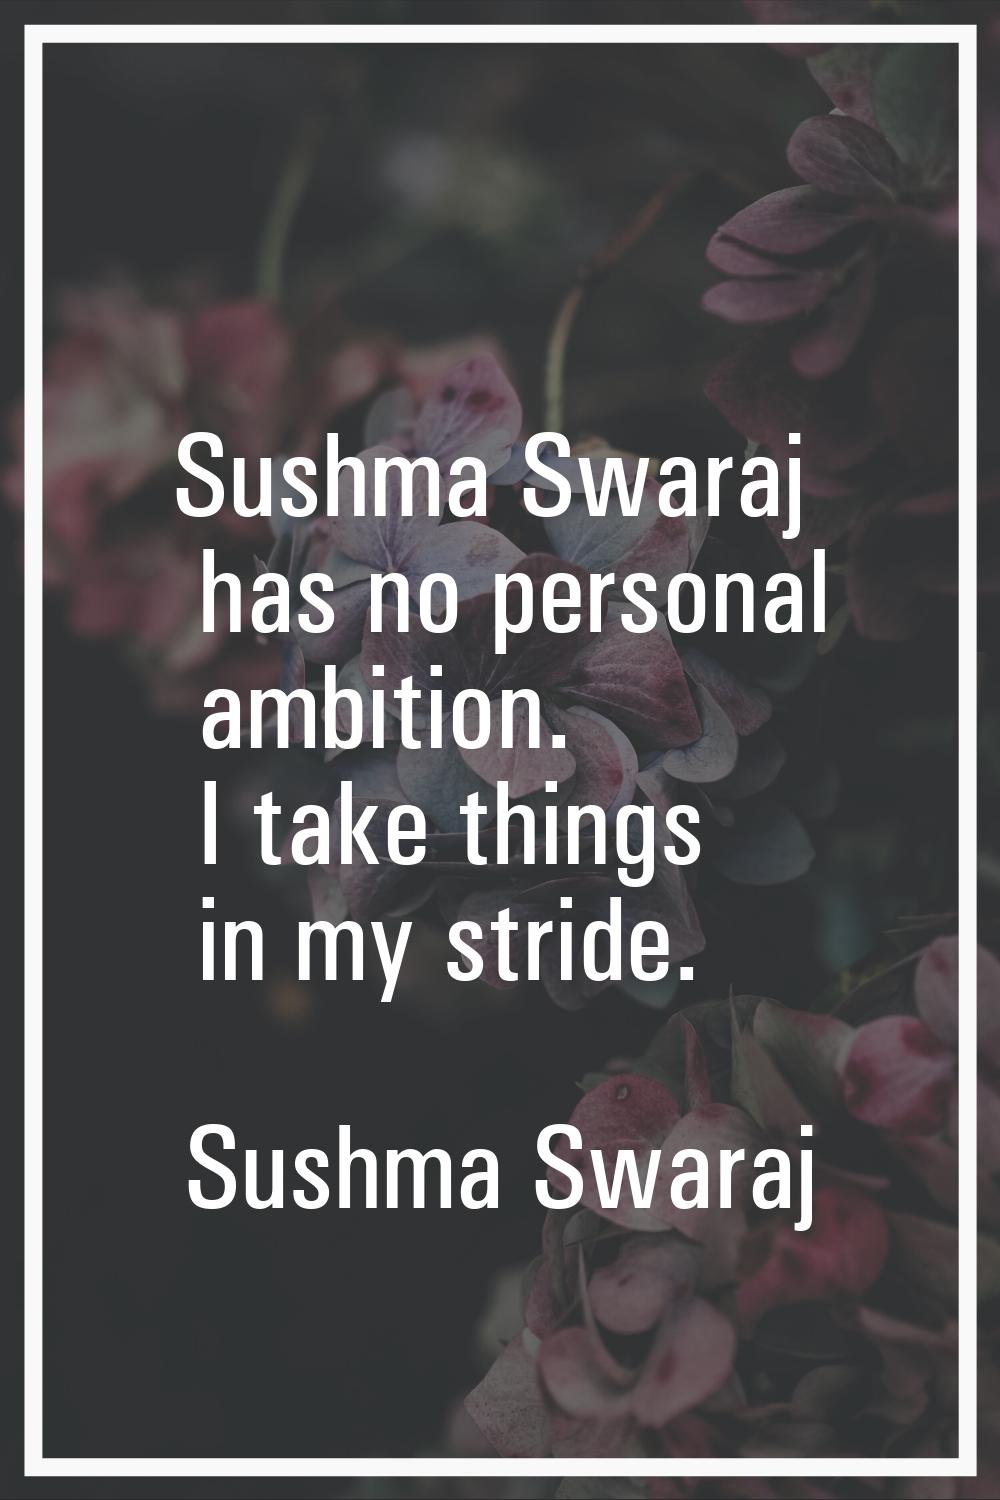 Sushma Swaraj has no personal ambition. I take things in my stride.